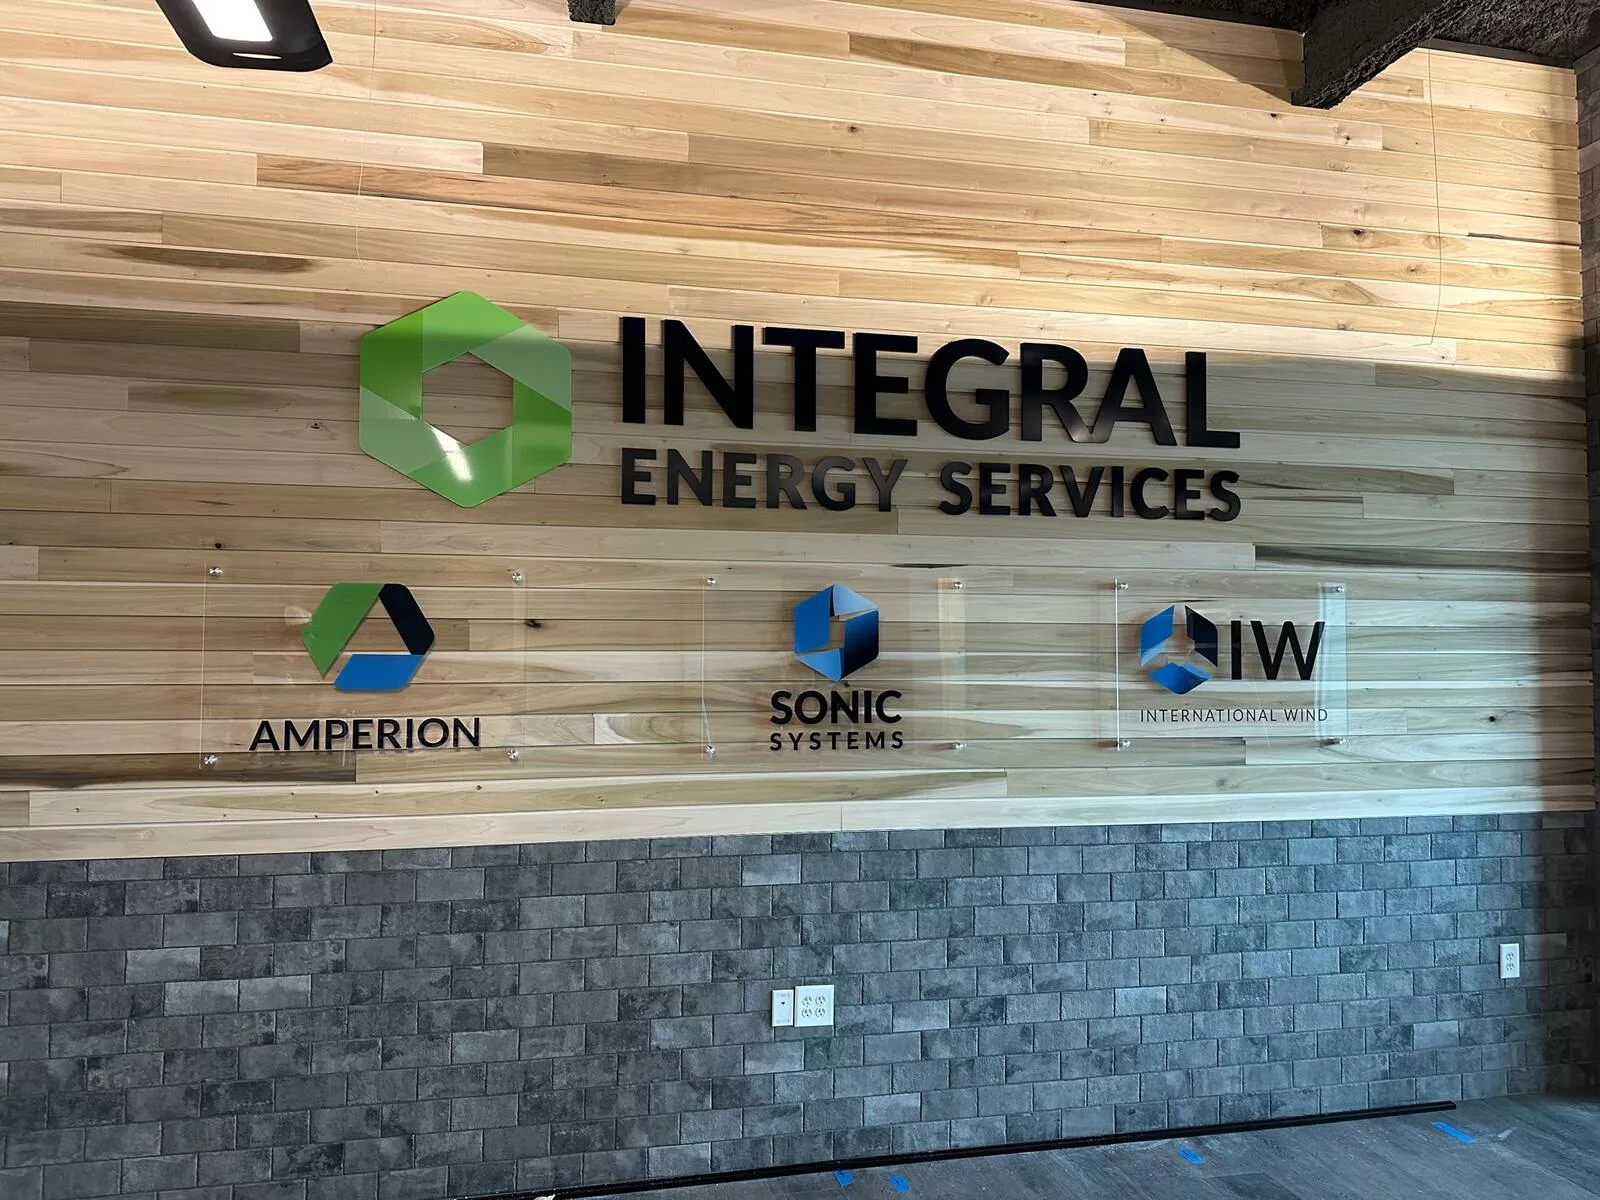 Vinyl Sign Of Integral Energy Services Installed On Glass